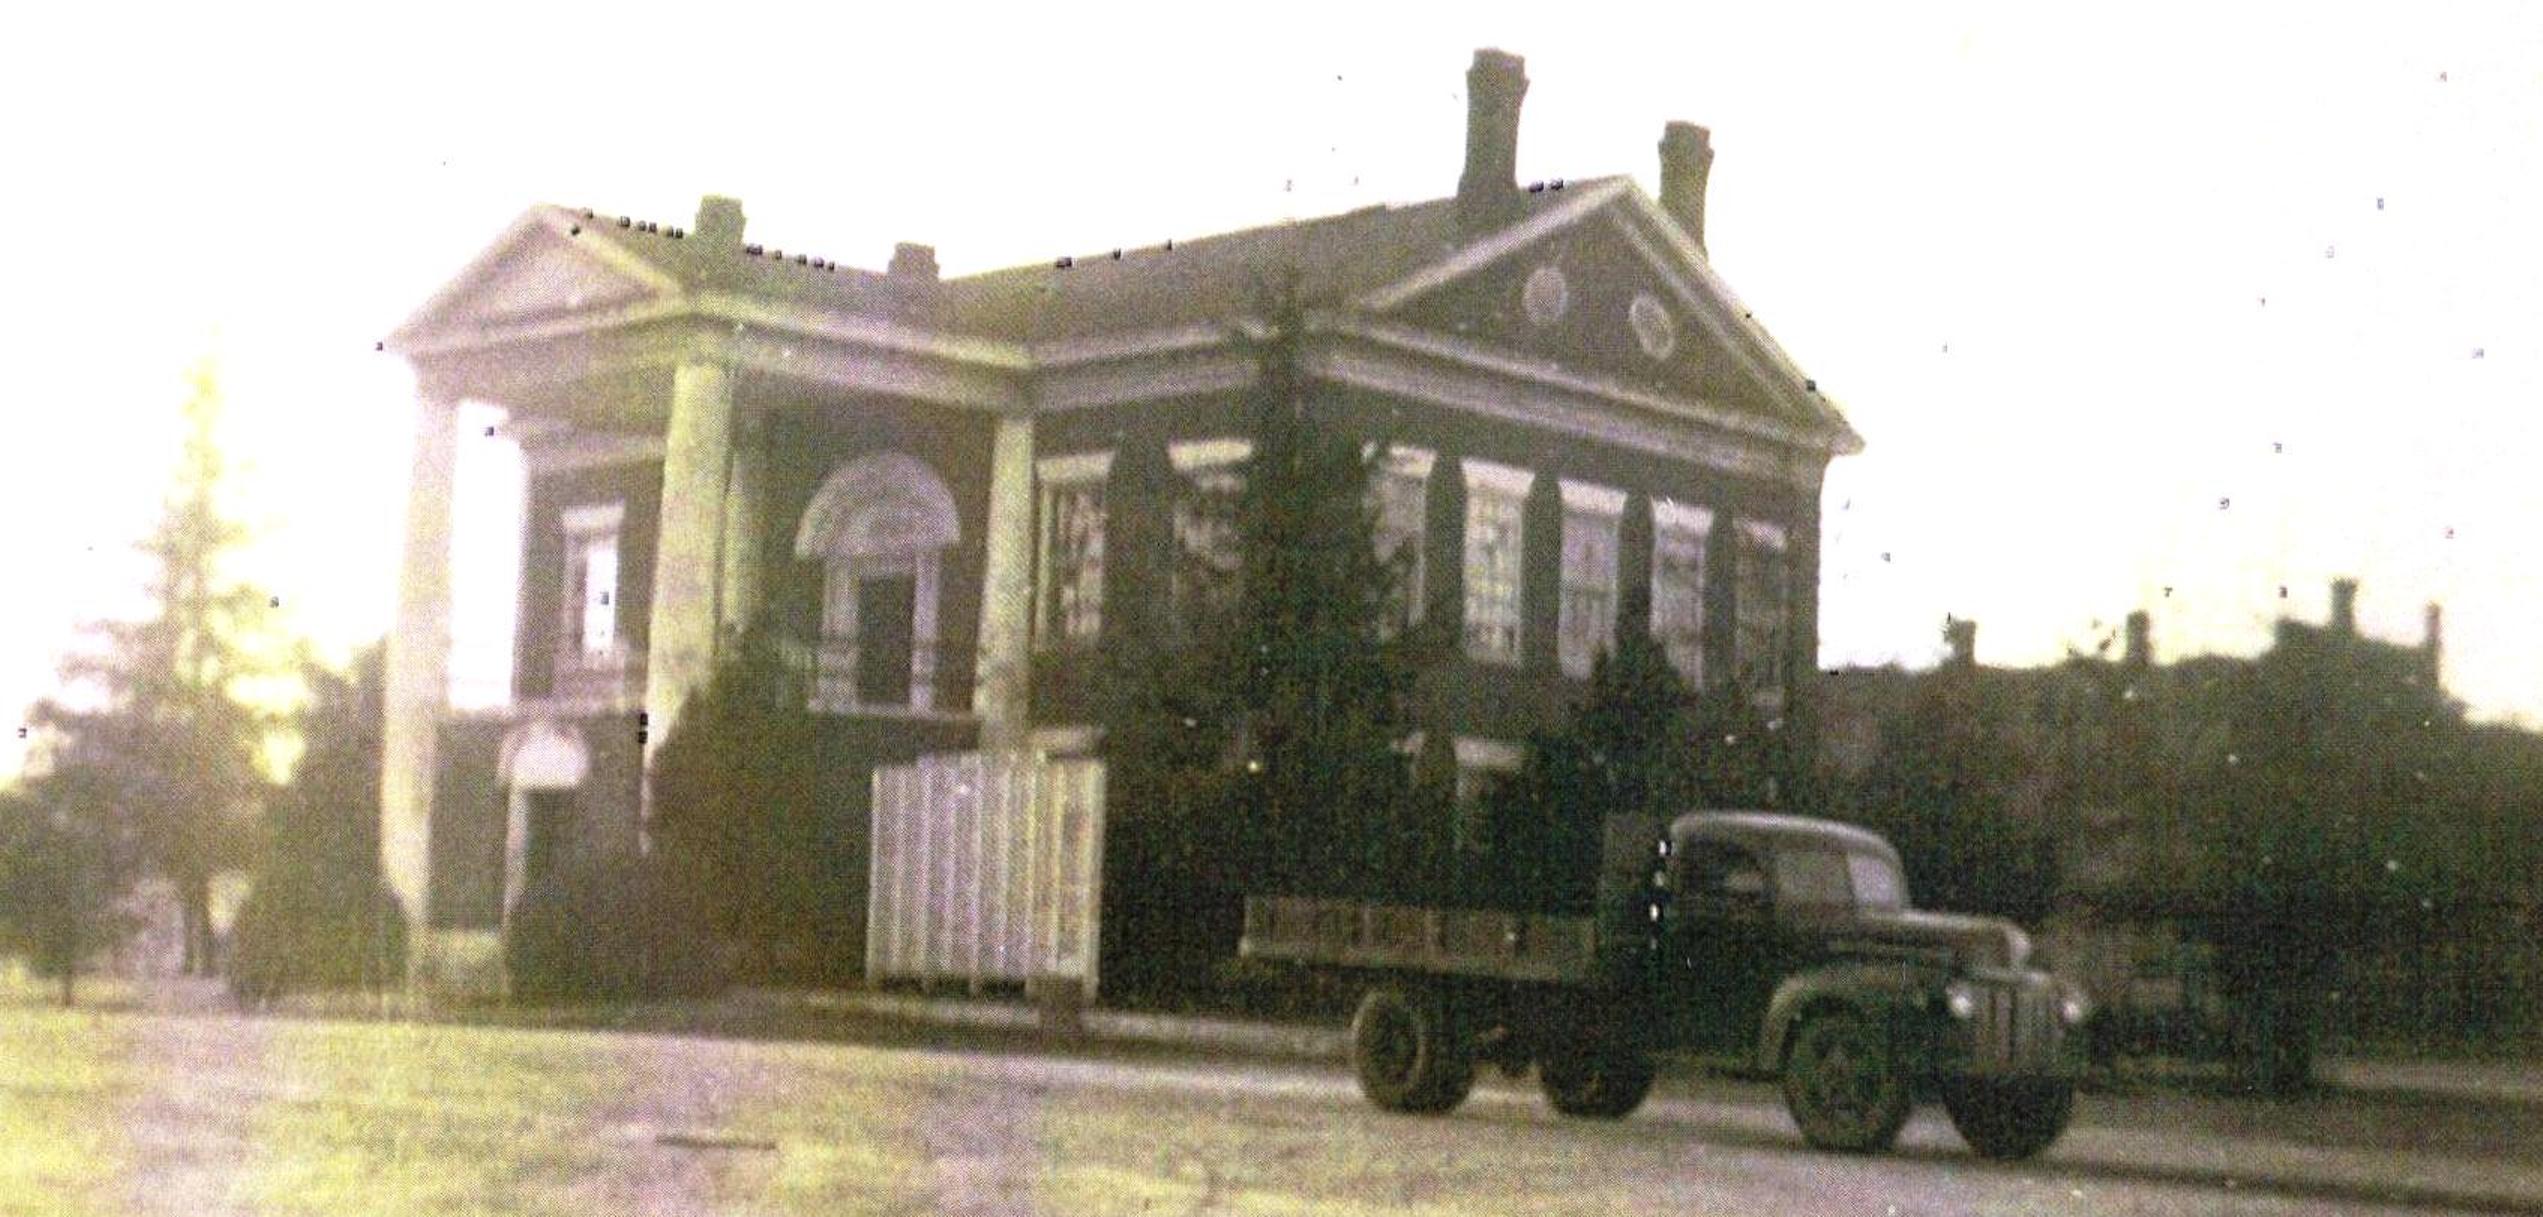 1940s Courthouse Photo 2